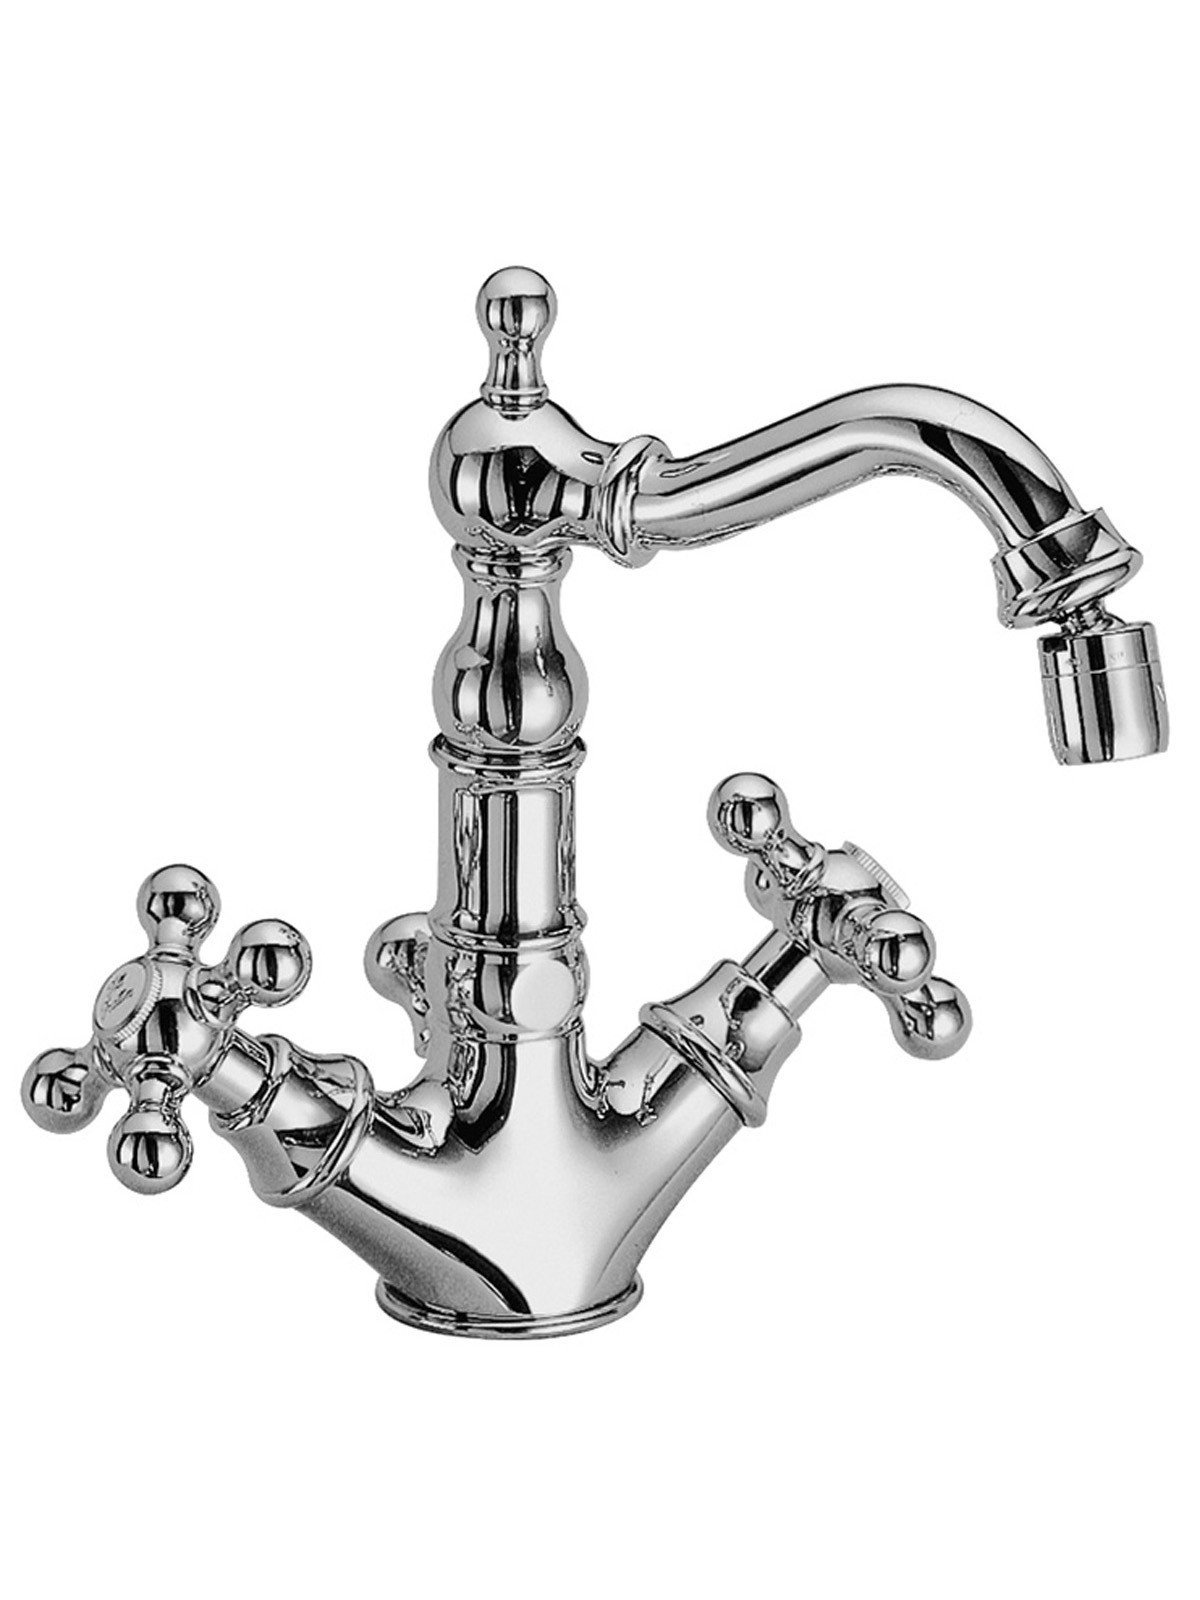 Single-hole bidet mixer with old-style spout and 1”1/4 pop-up wa